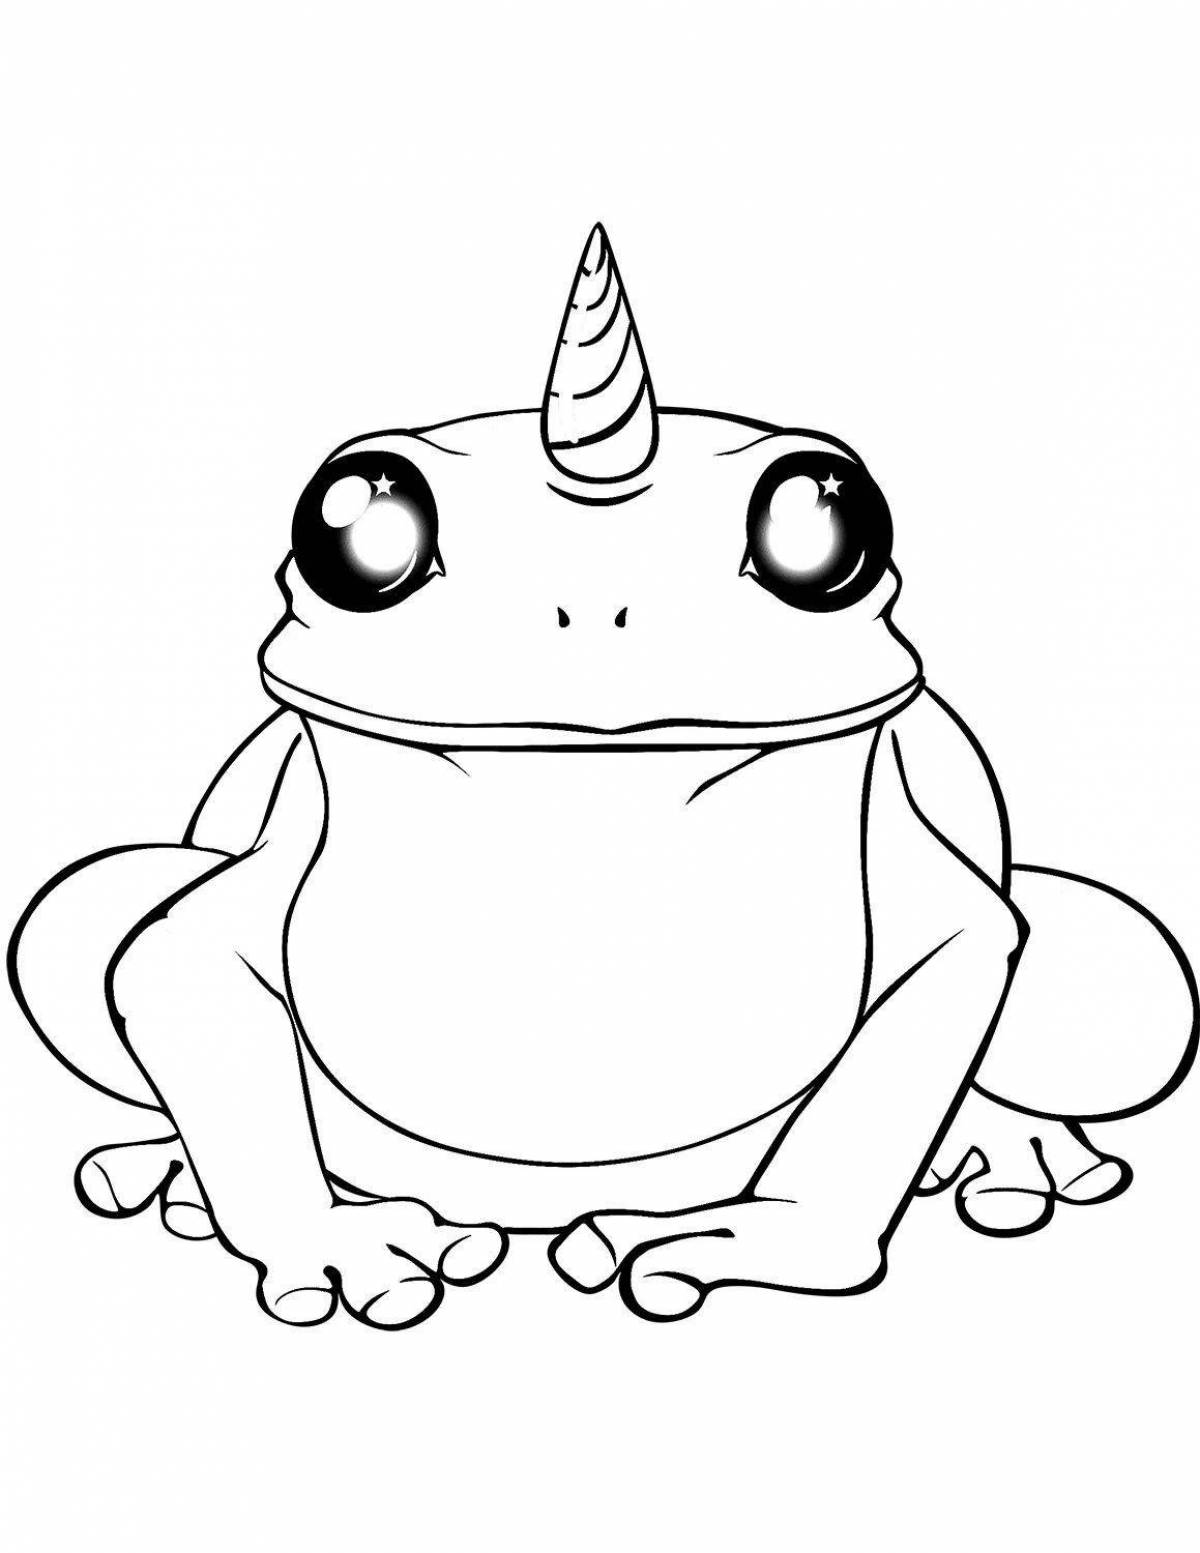 Coloring page fluffy cute frog